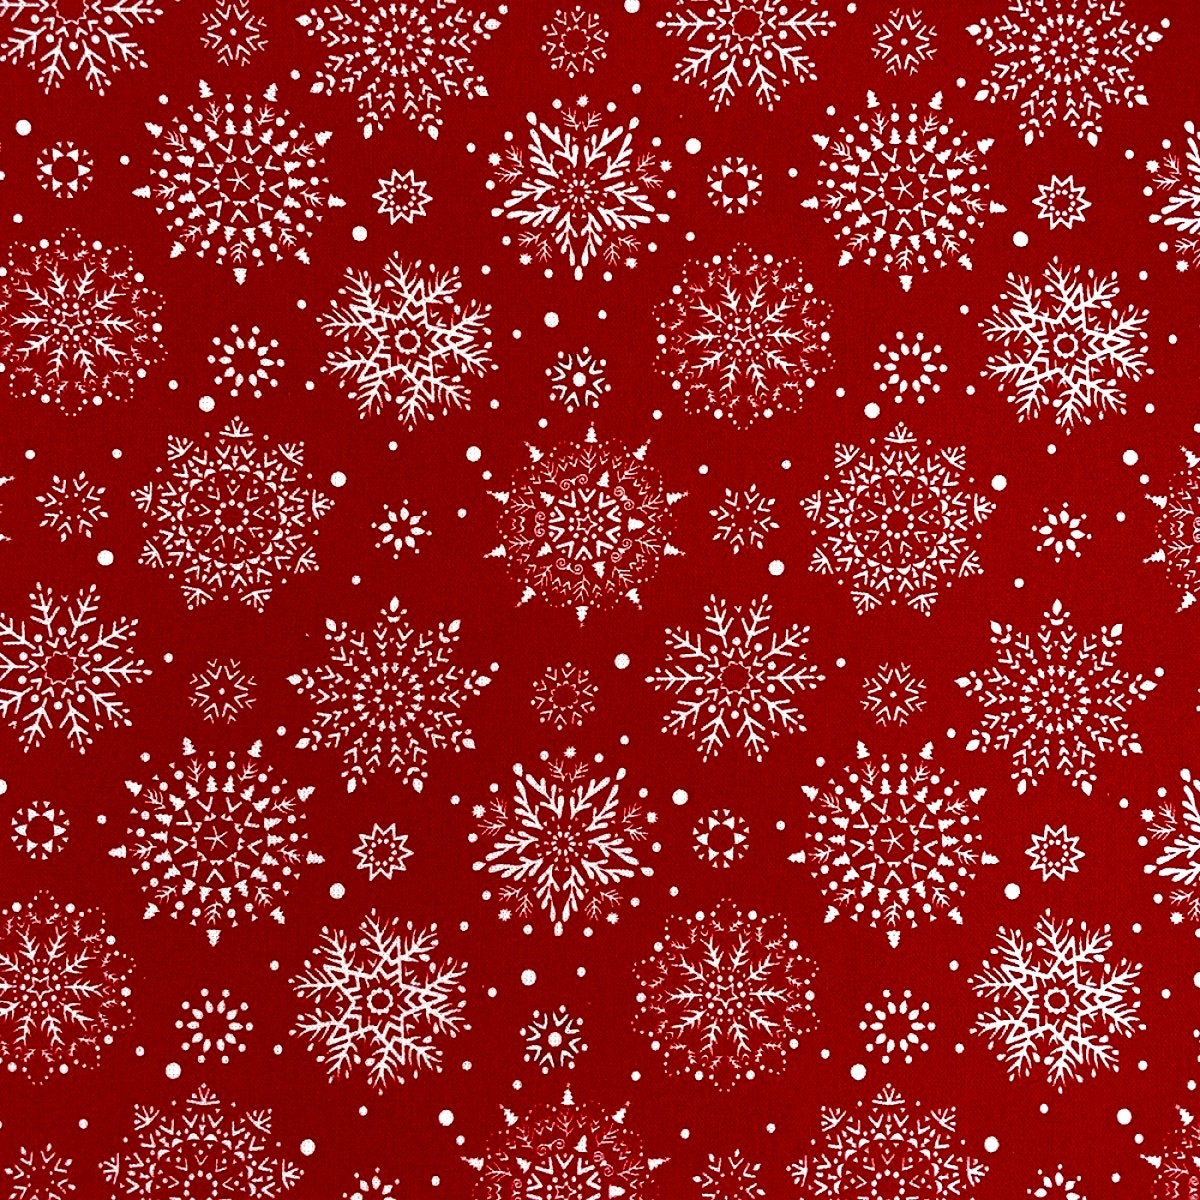 Christmas Fabric by the Yard, Quilting Cotton, Green Red White, Stockings,  Candy Canes, Holiday Festive Snow, Snowflakes, Pretty 